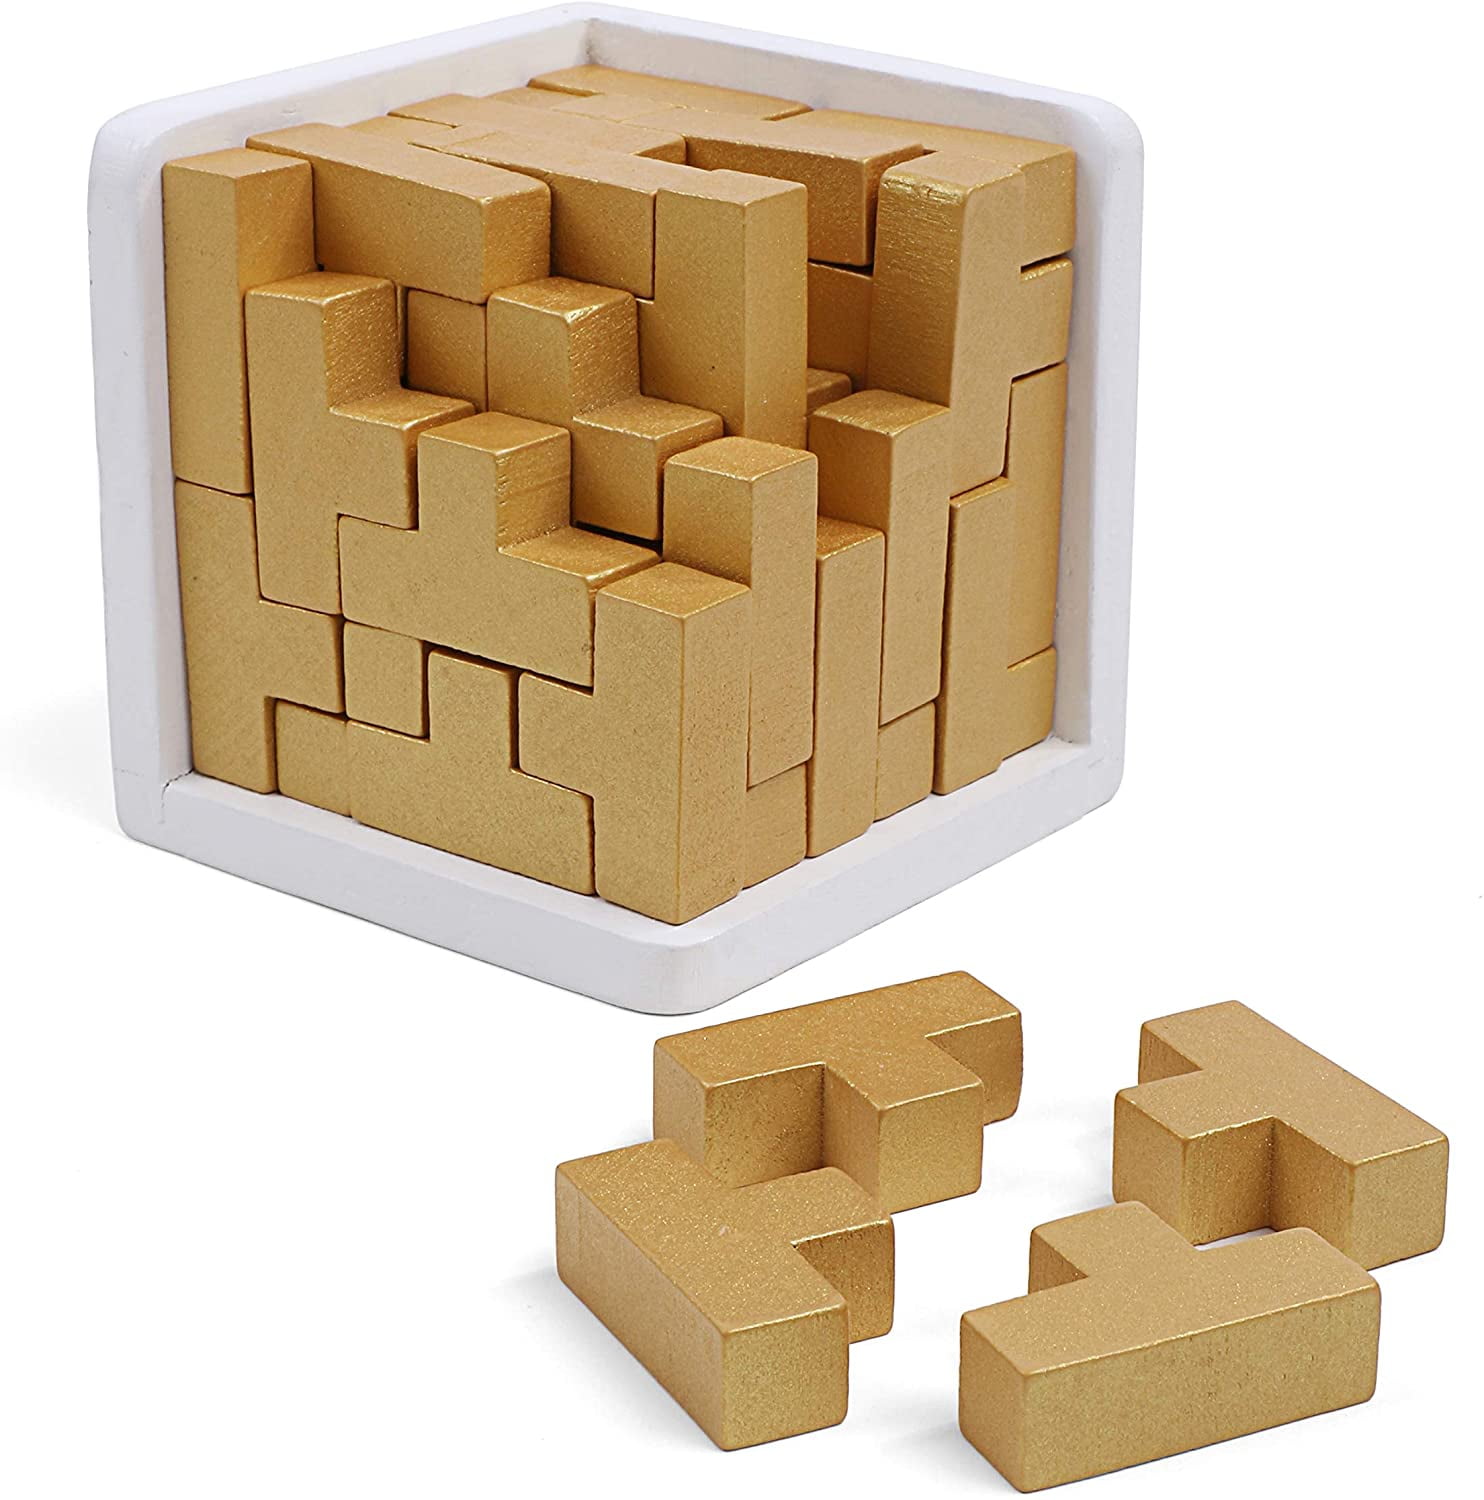  Wooden Brain Teaser Puzzle Cube: Cool Office Gadgets for Desk,  Block Puzzles & Cube Puzzle for Adults and Teens, Educational Toy, 54  T-Shaped Pieces